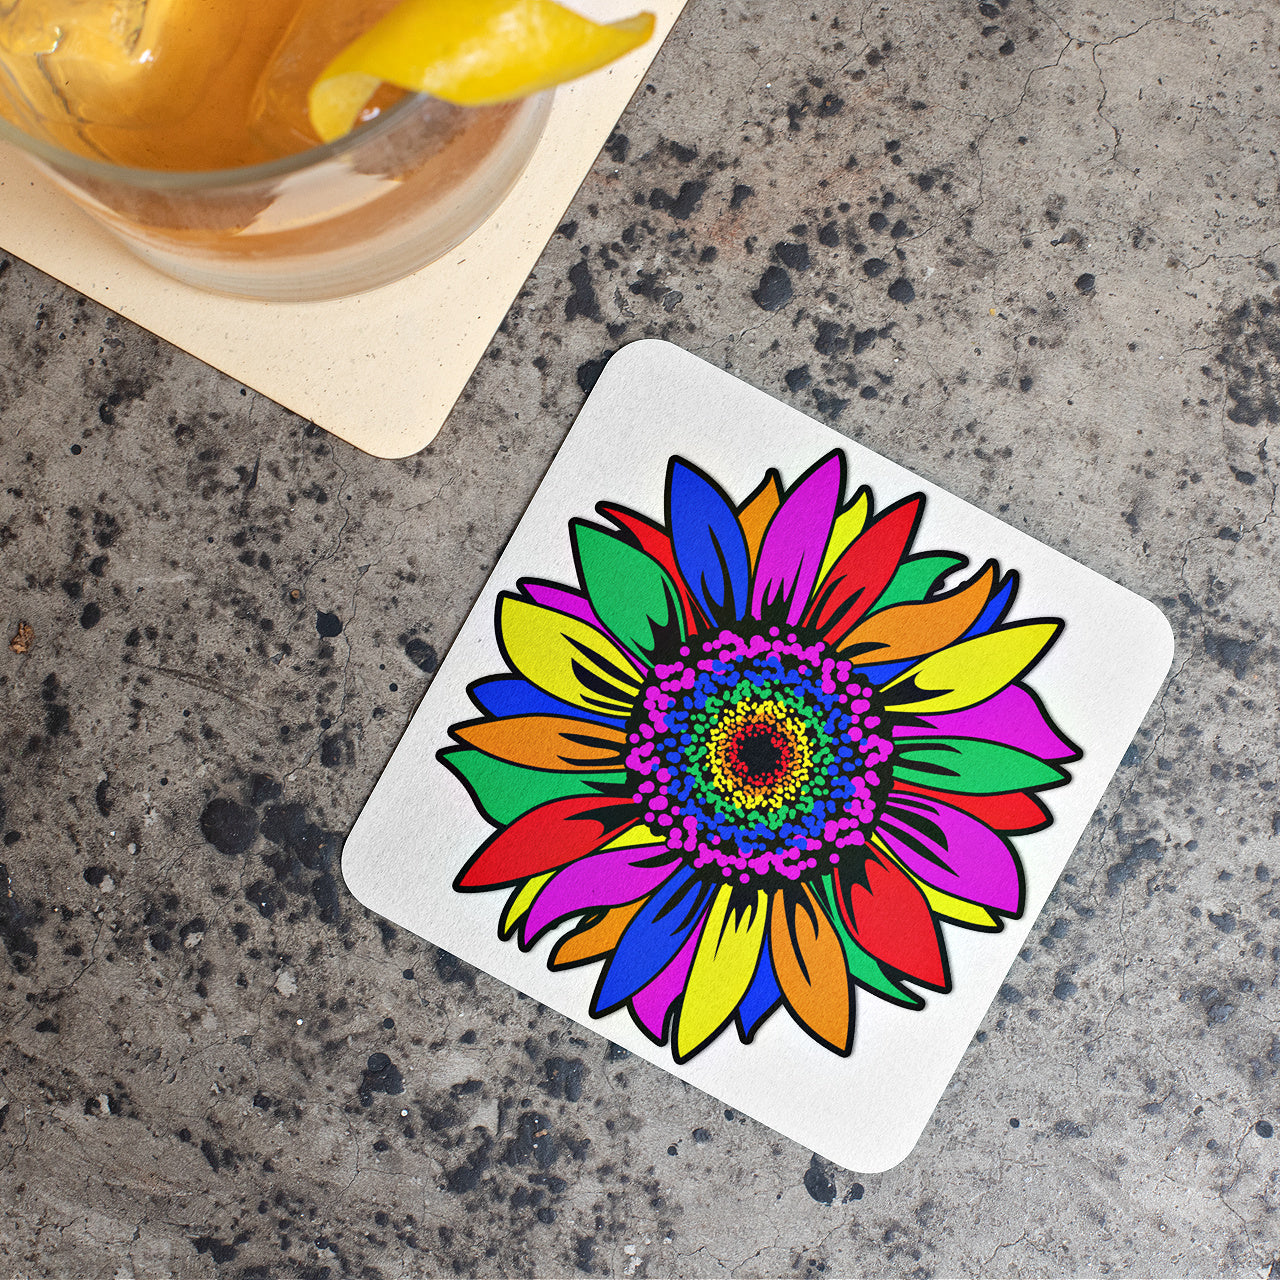 Mock up of one of the Rainbow Sunflower Coasters next to a cocktail over a concrete surface